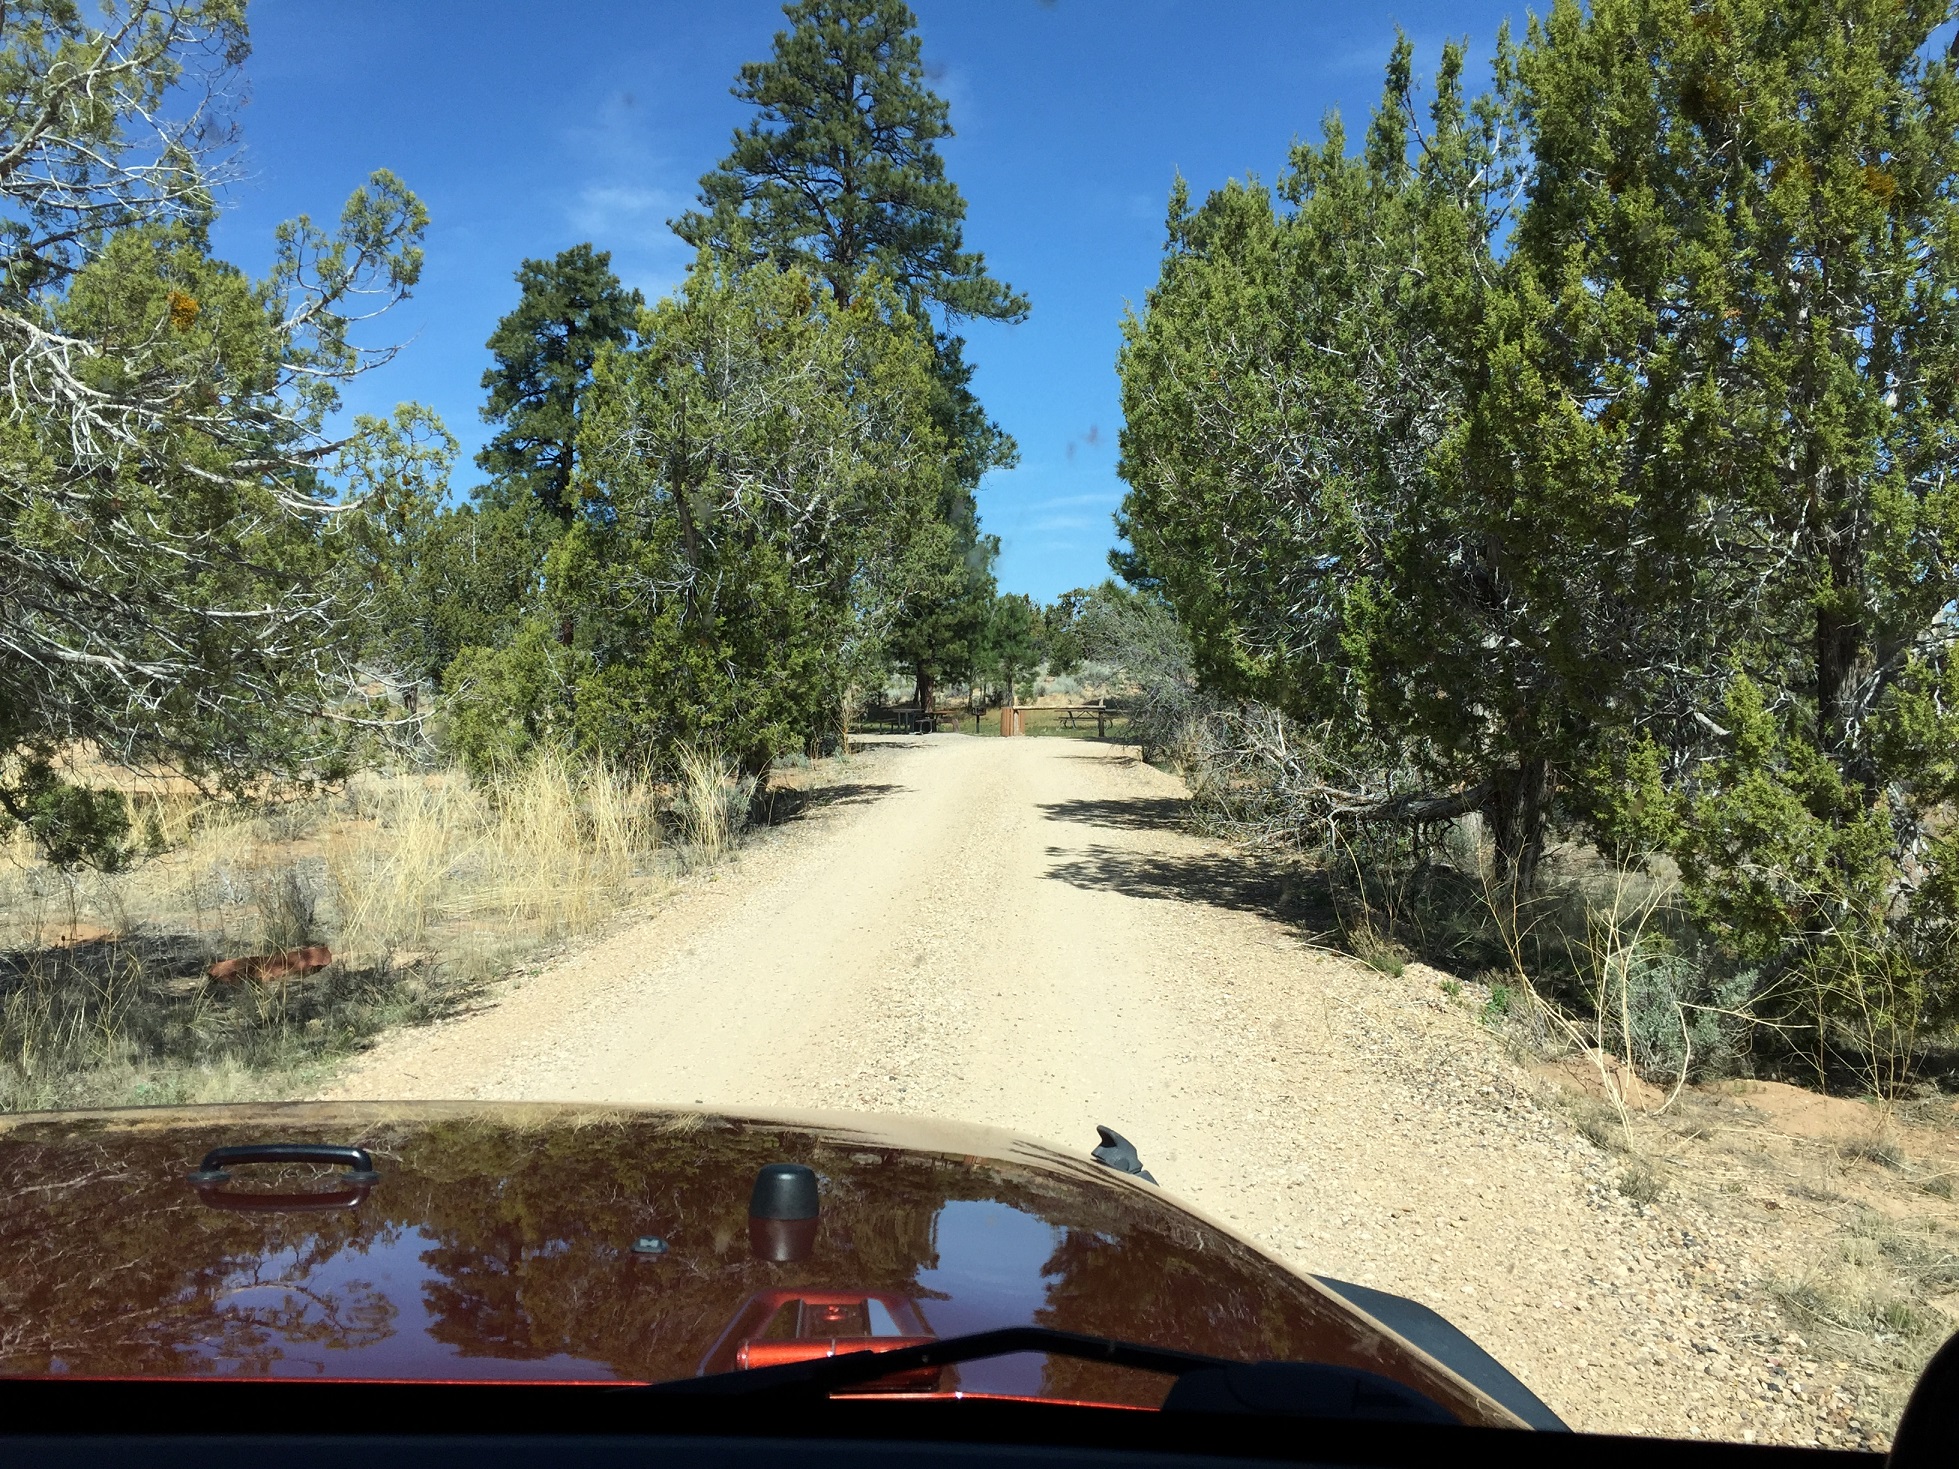 Entrance to the BLM's Ponderosa Campground